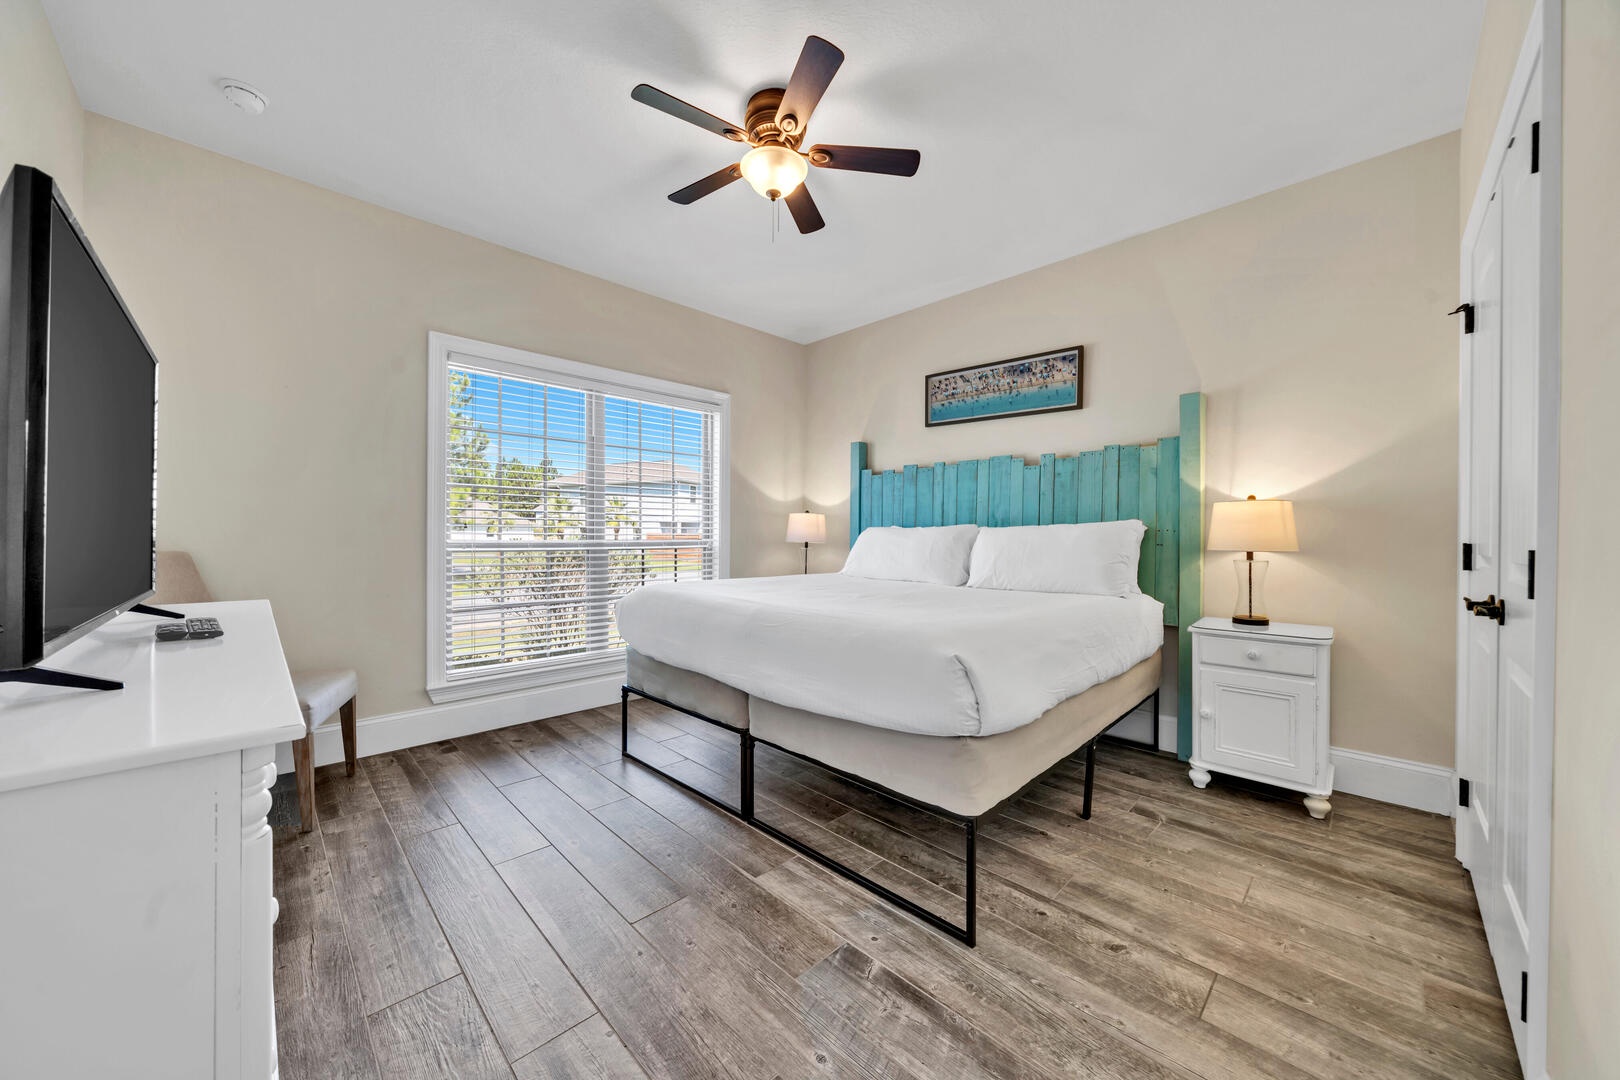 The guest bedroom features a king size bed and plentiful light!